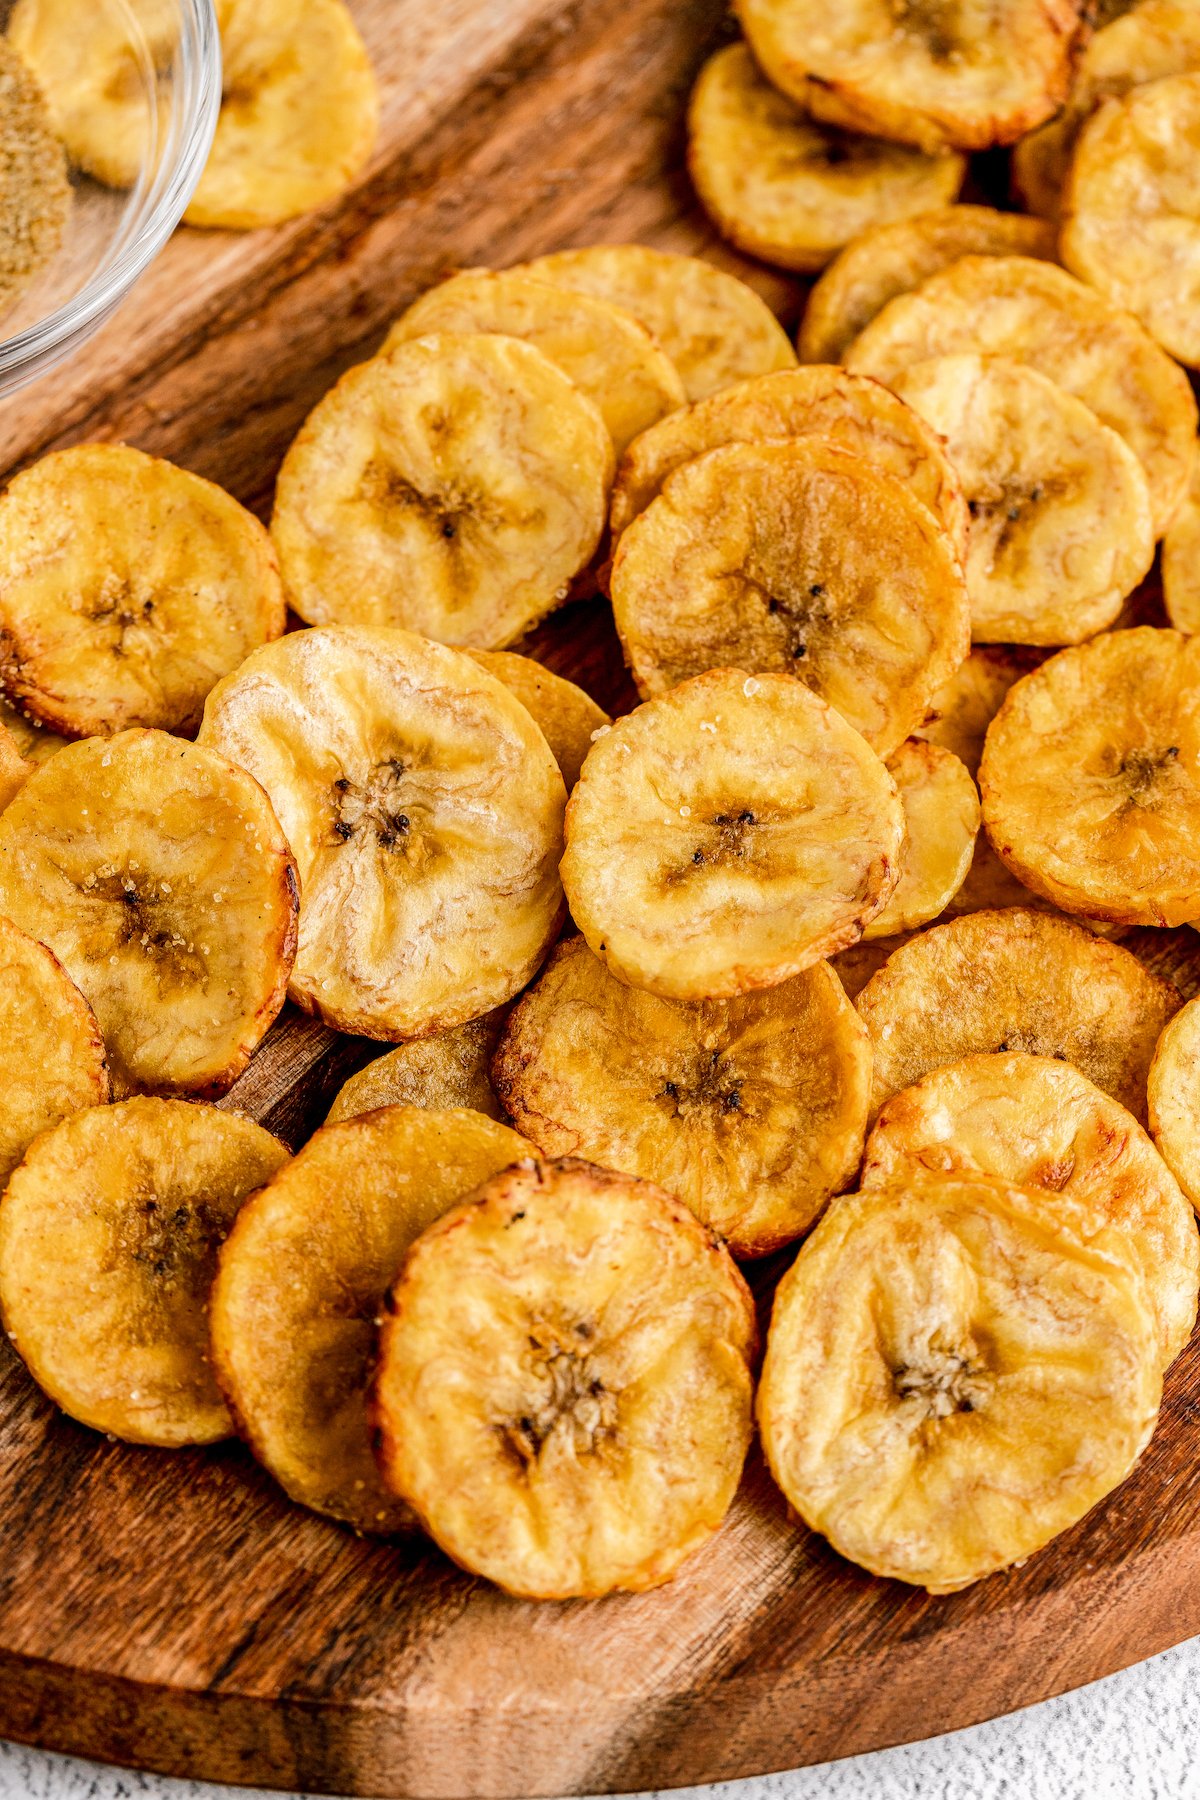 Golden-brown, baked plantain crisps on a cutting board.